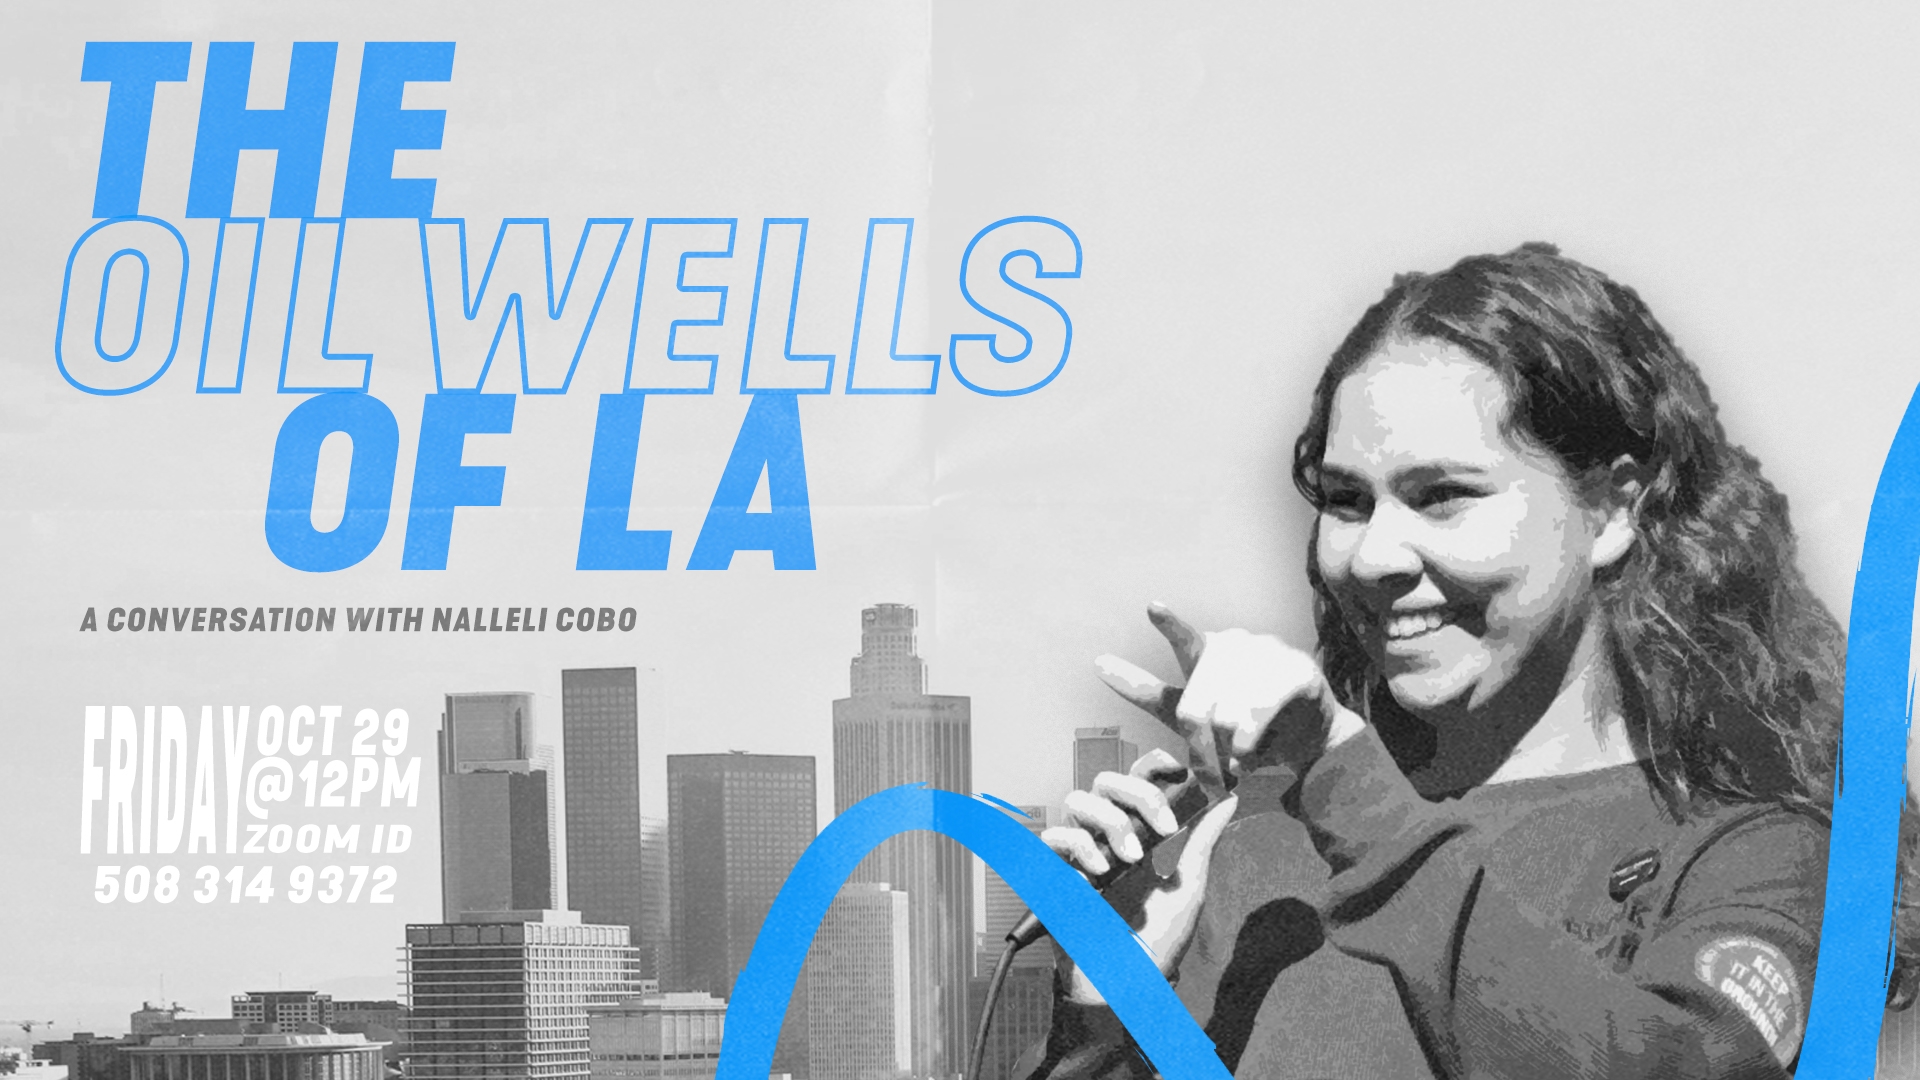 The Oil Wells of L.A. - A conversation with Nalleli Cobo